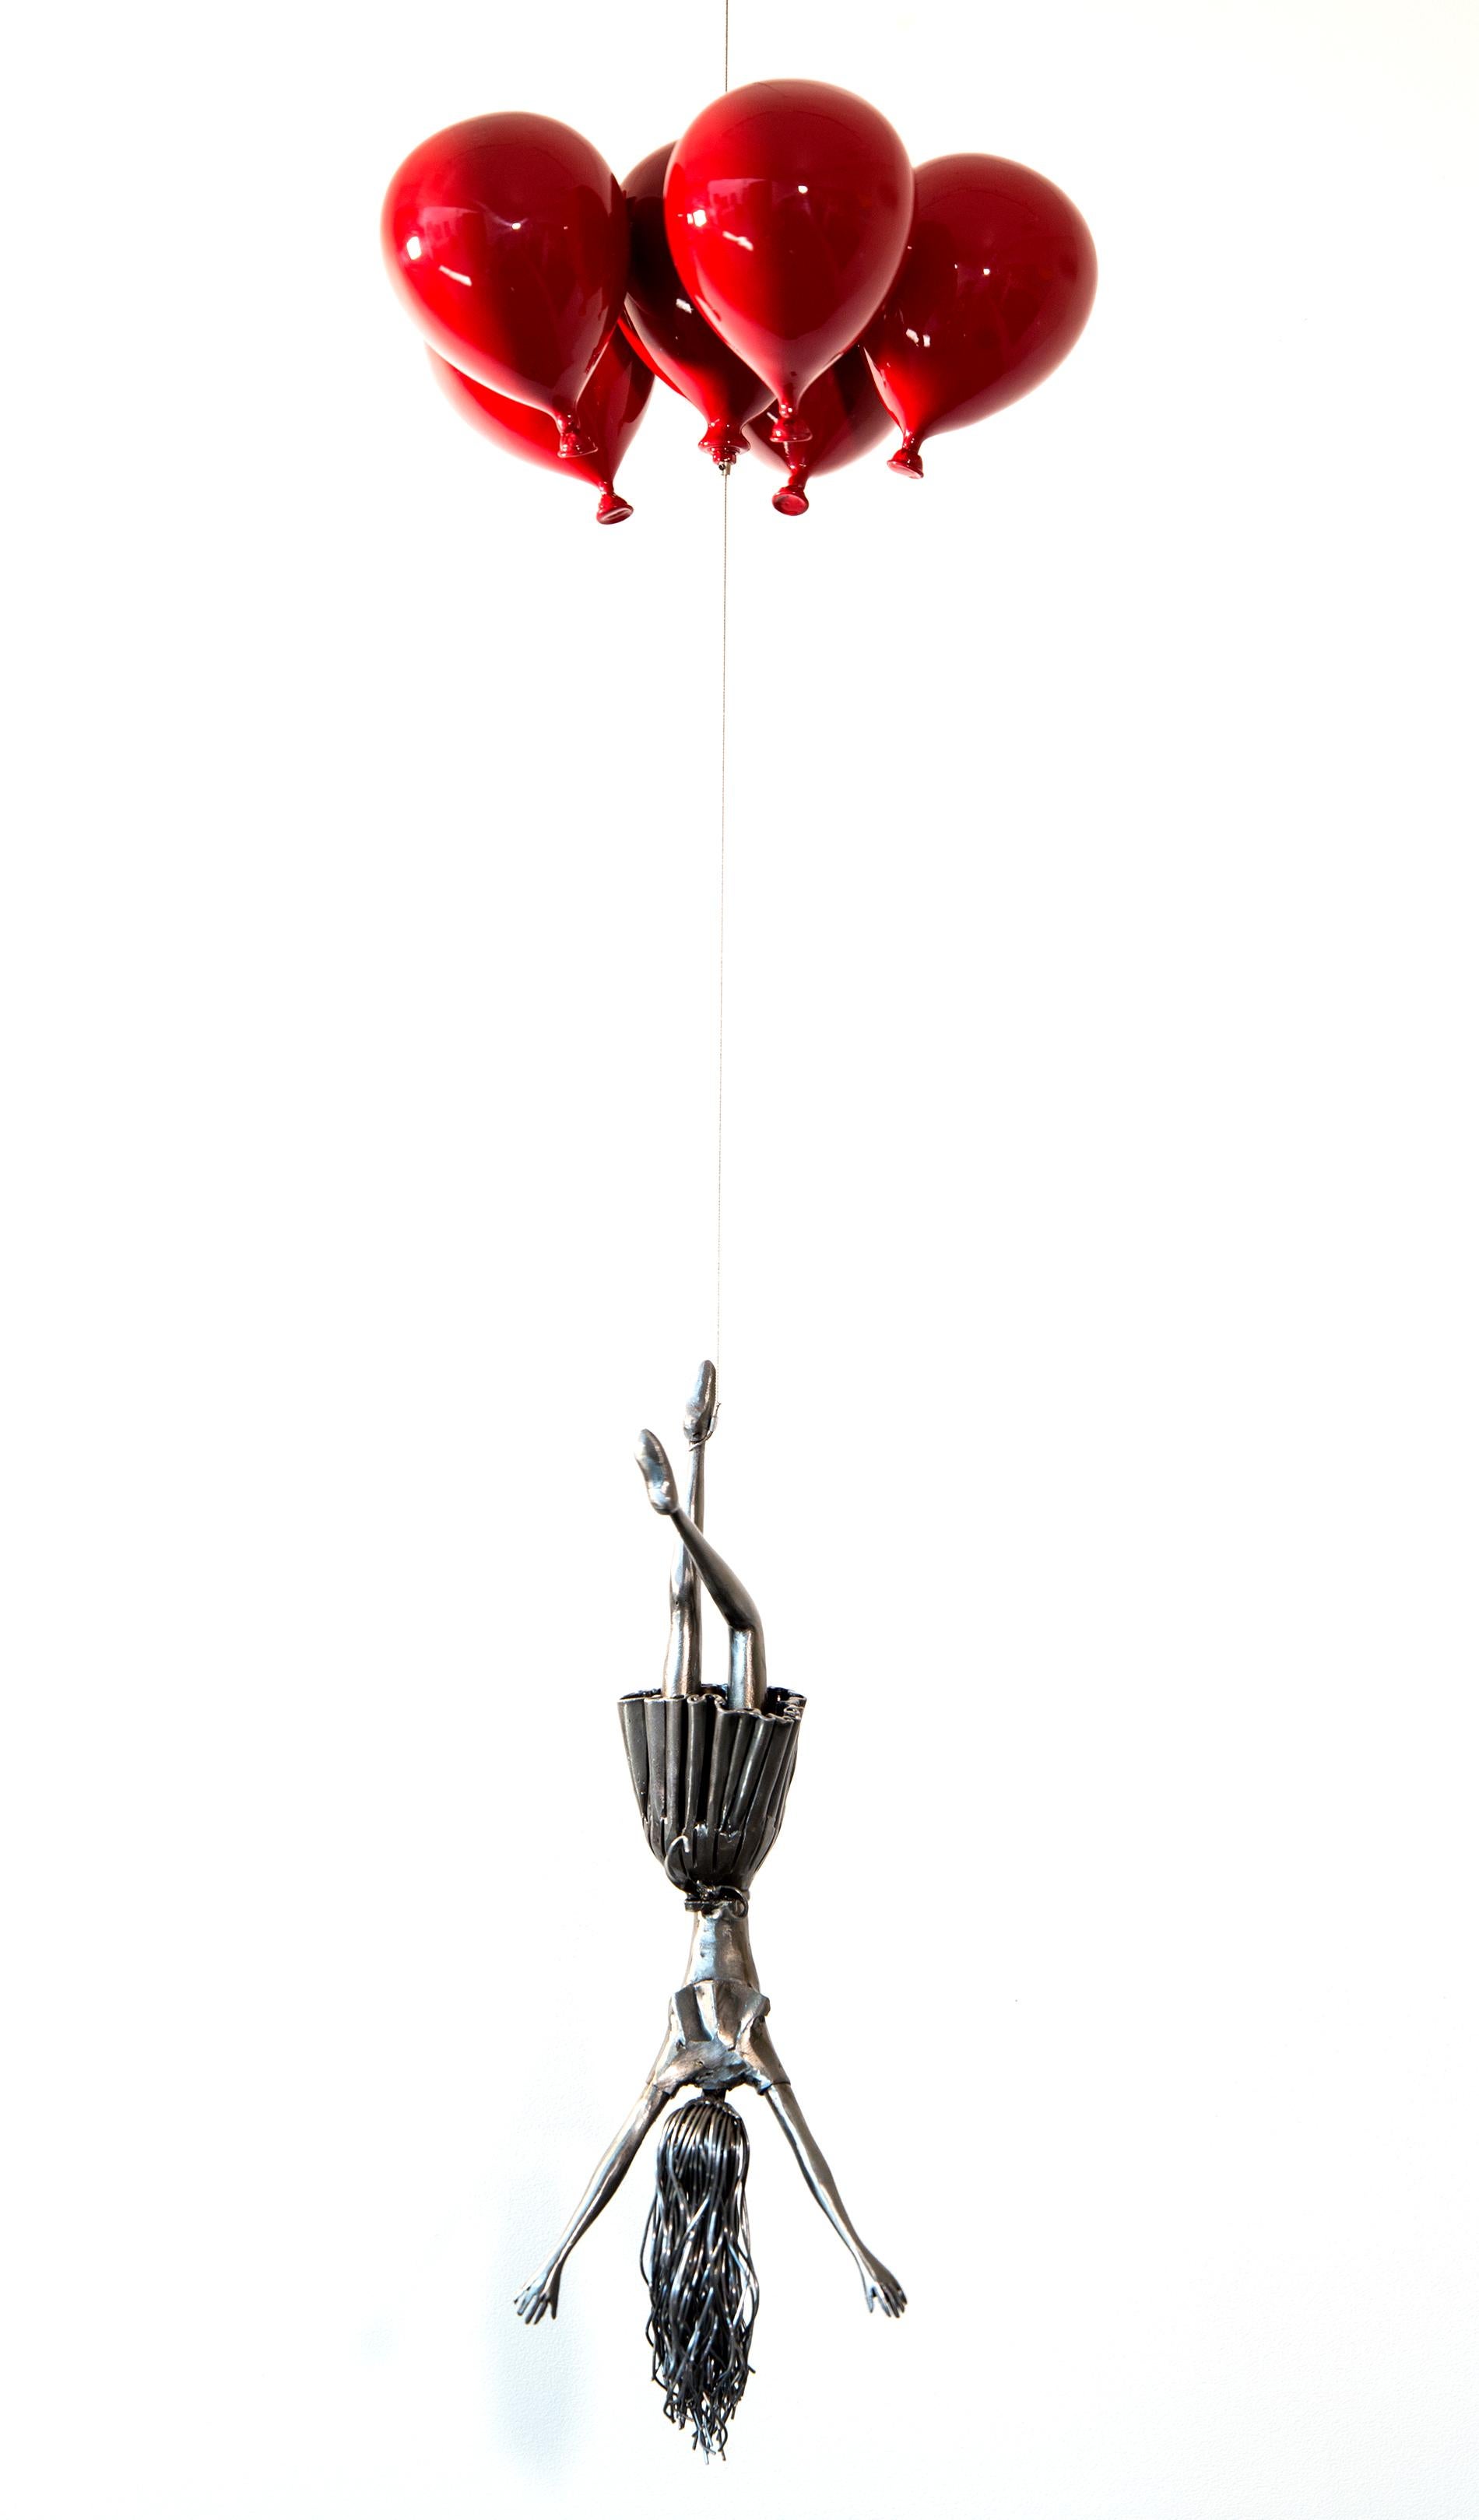 Red Line - woman, figure, steel, colorful, balloons, suspended sculpture 2